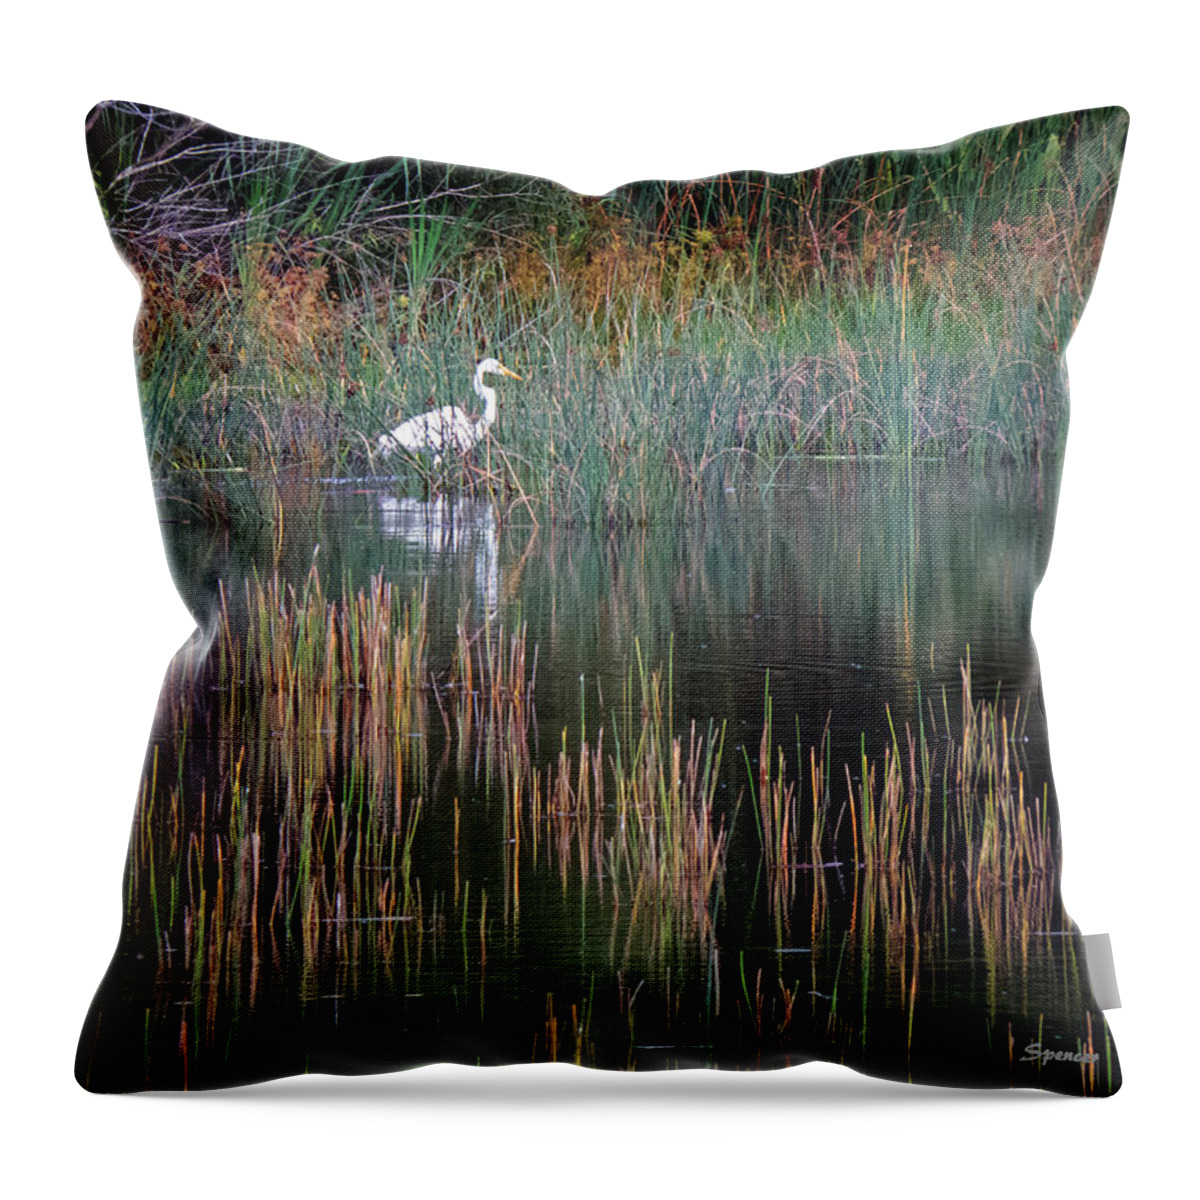 Wetlands Throw Pillow featuring the photograph Reflections by T Guy Spencer